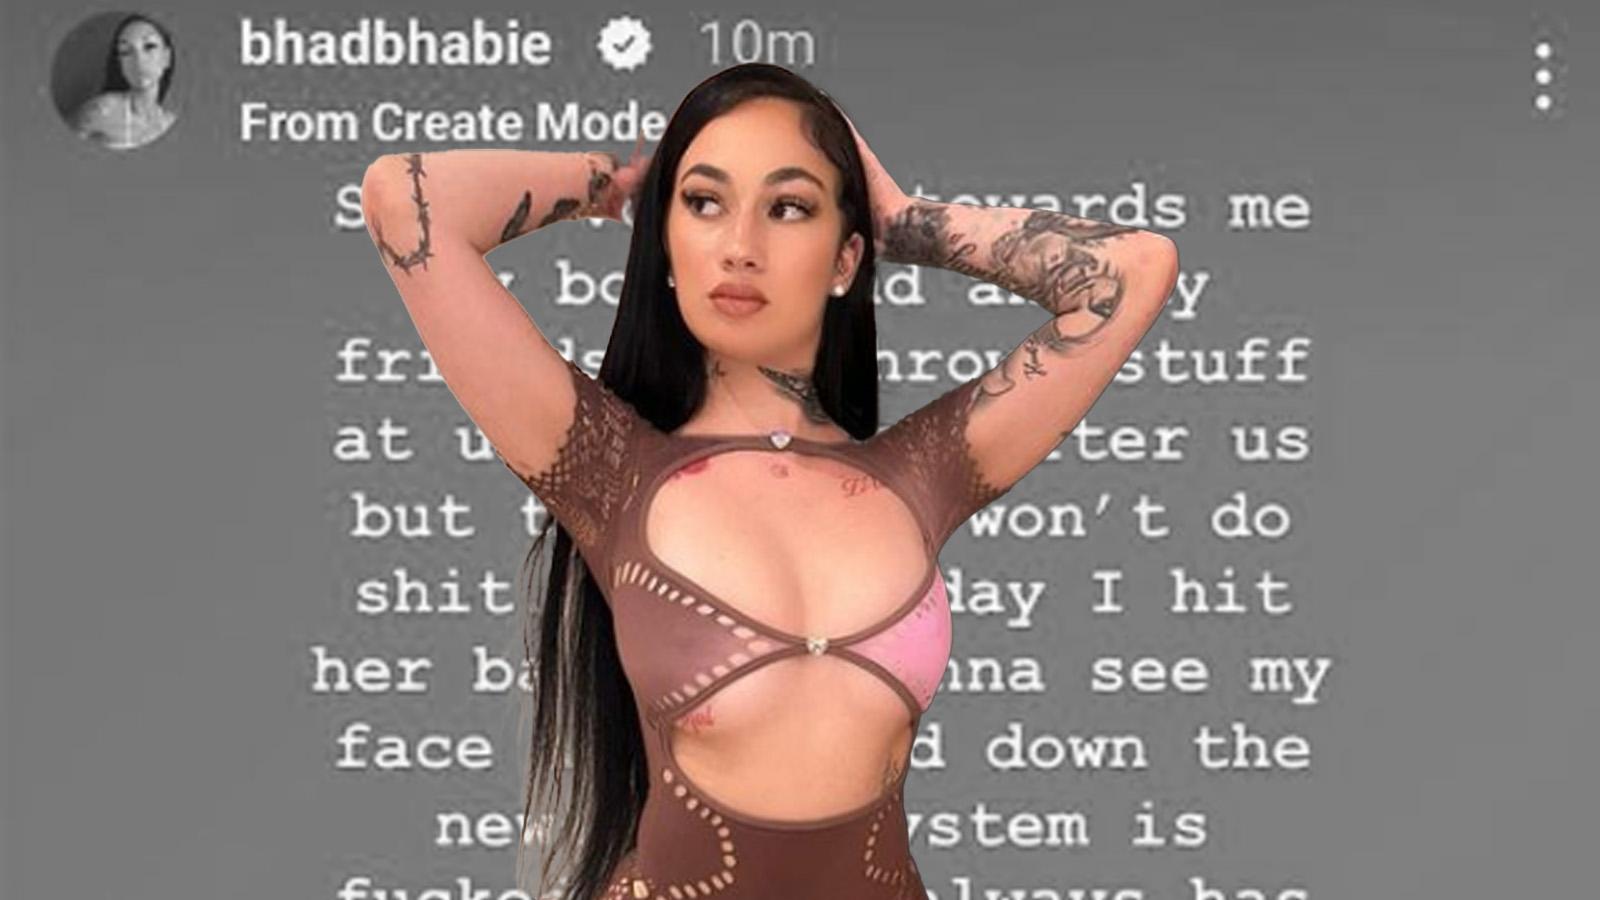 Bhad bhabie first onlyfans post